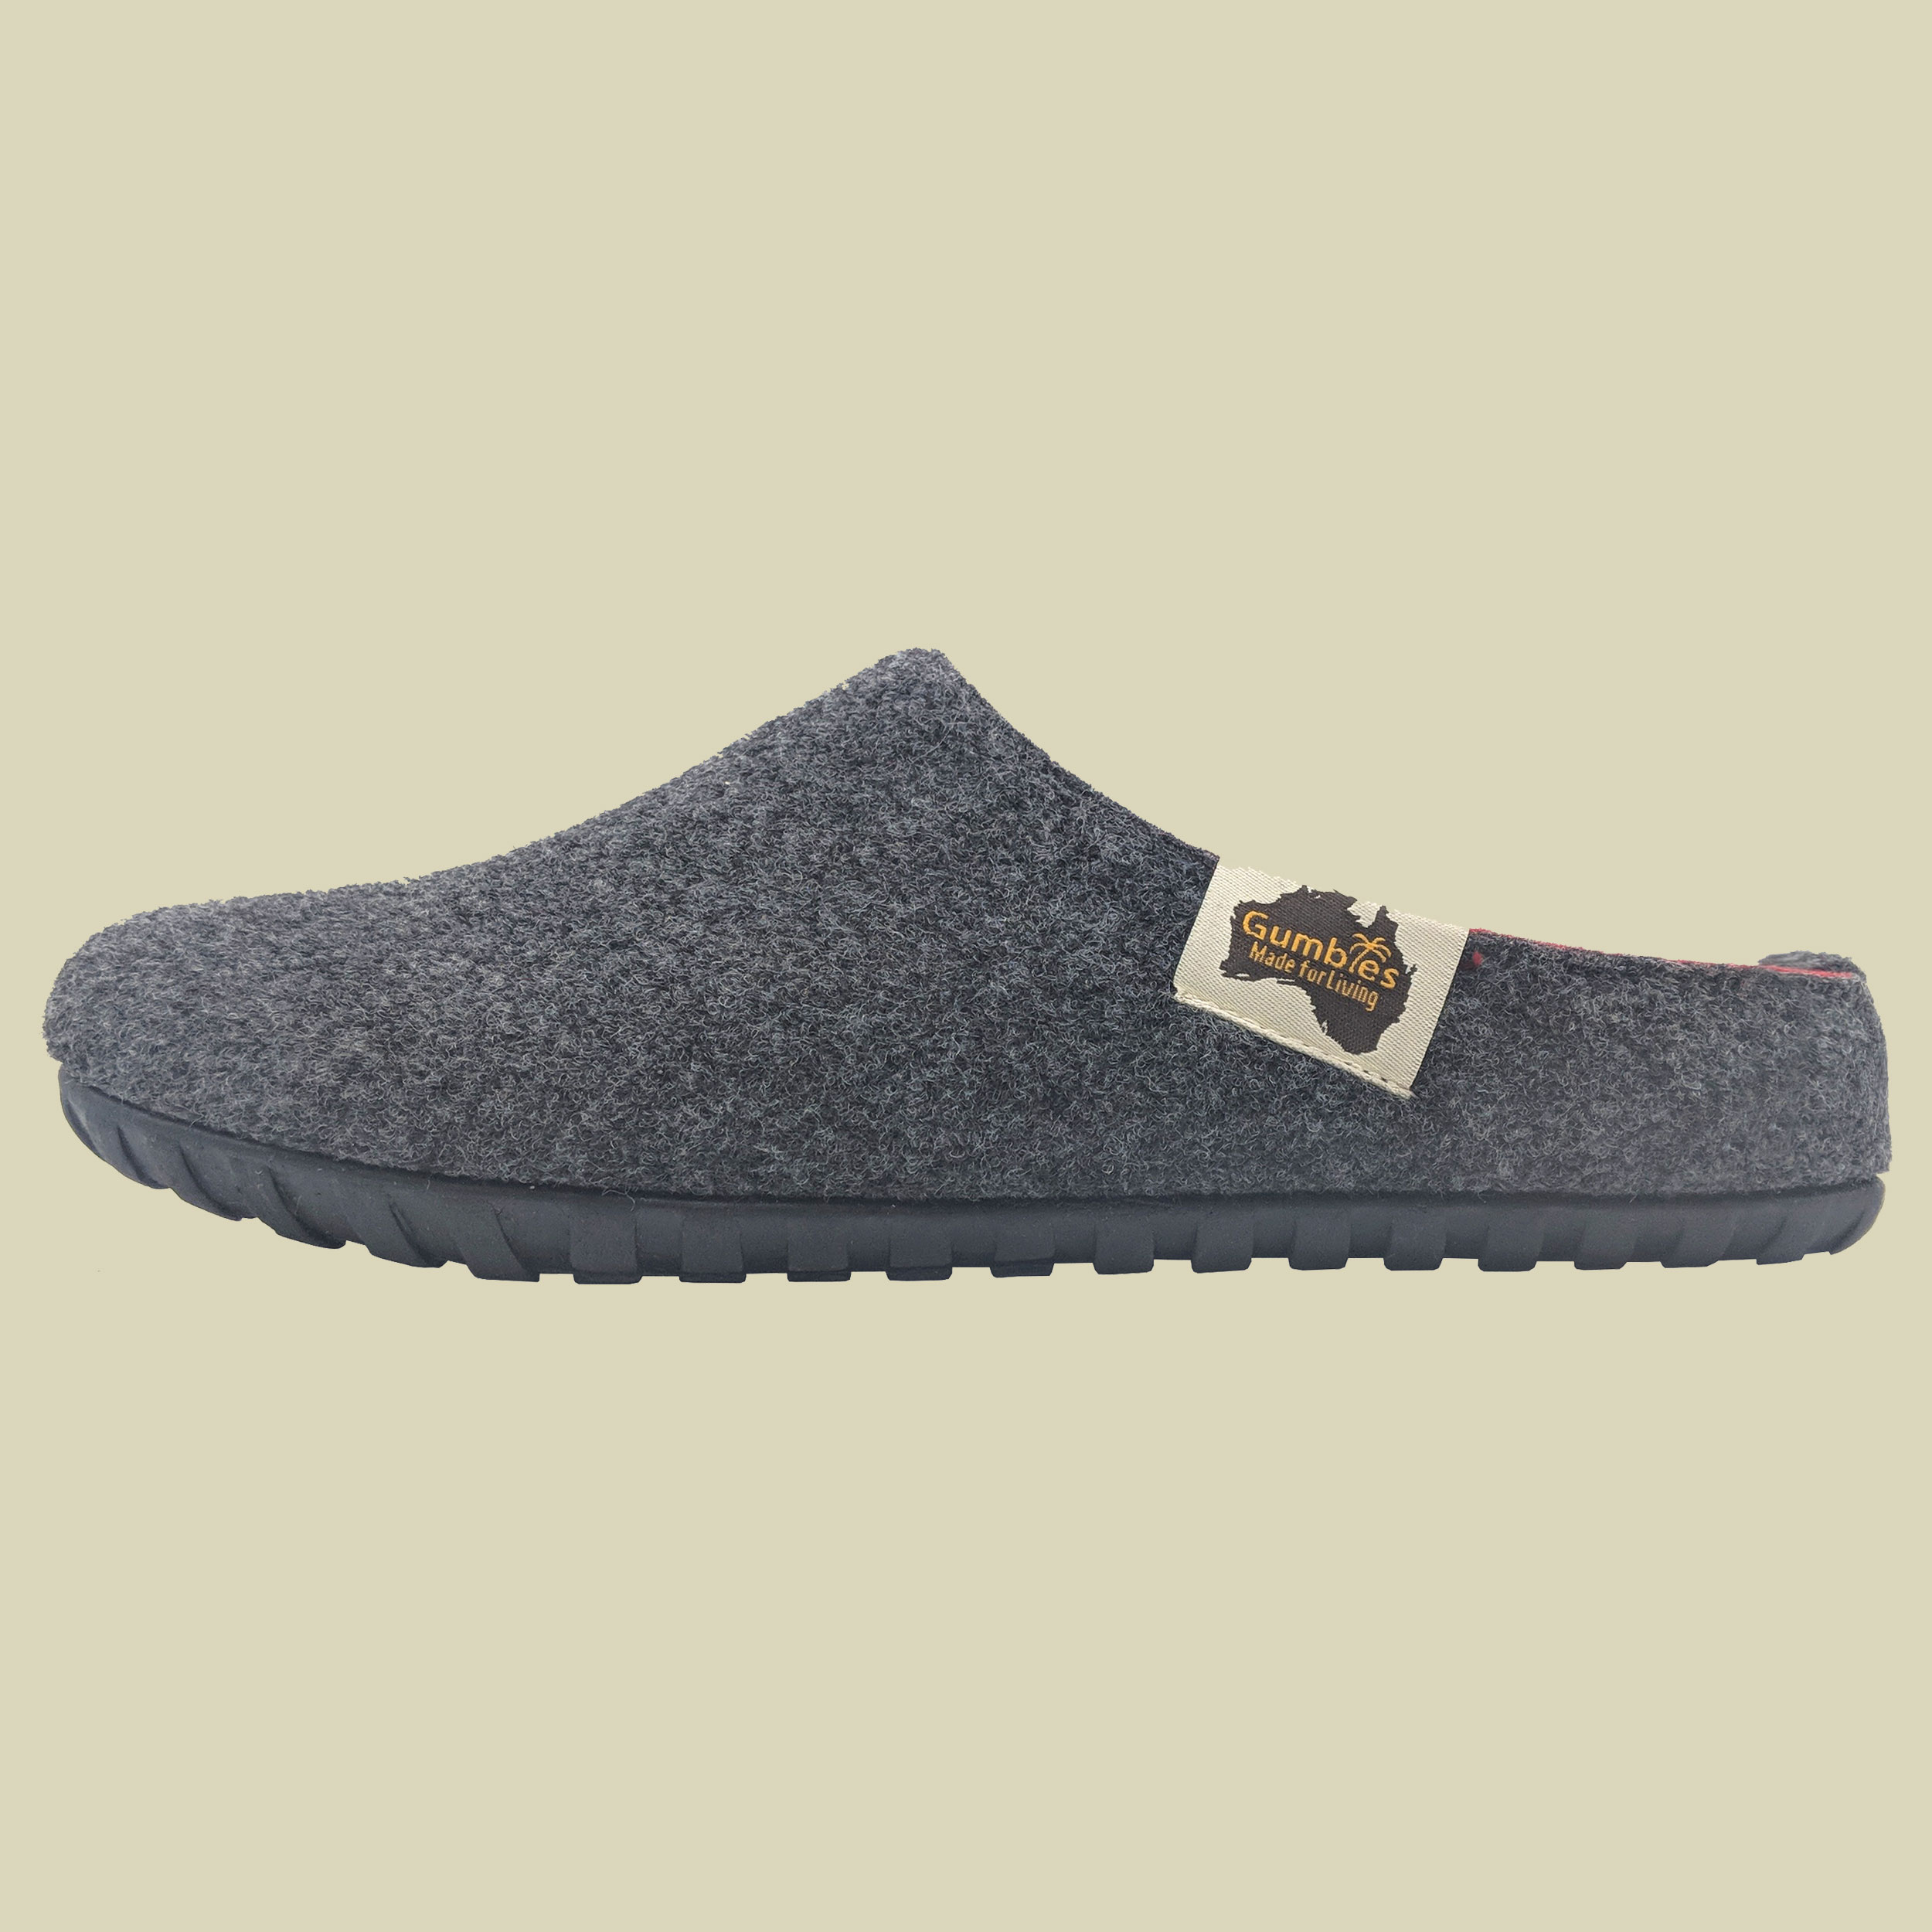 Outback Slipper Women Größe 36 Farbe charcoal/red